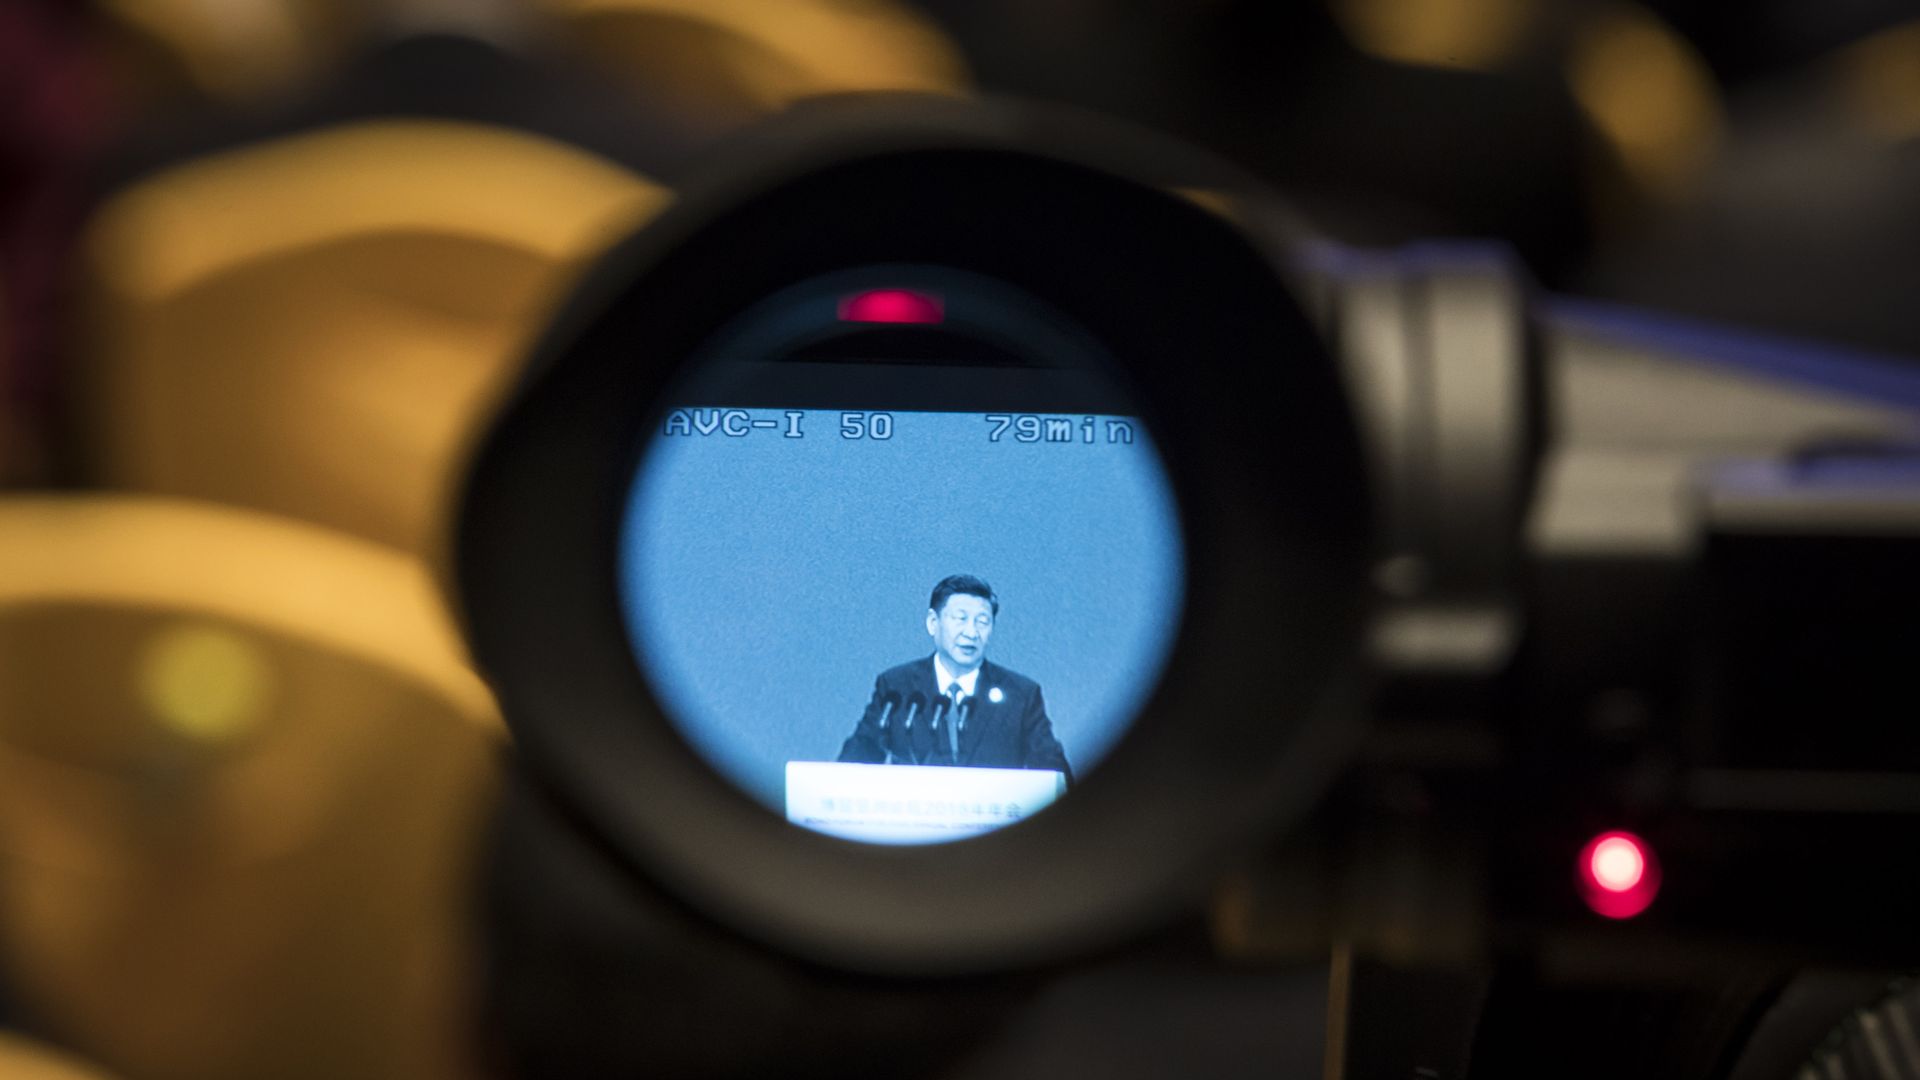 Xi seen through the viewfinder of a camera